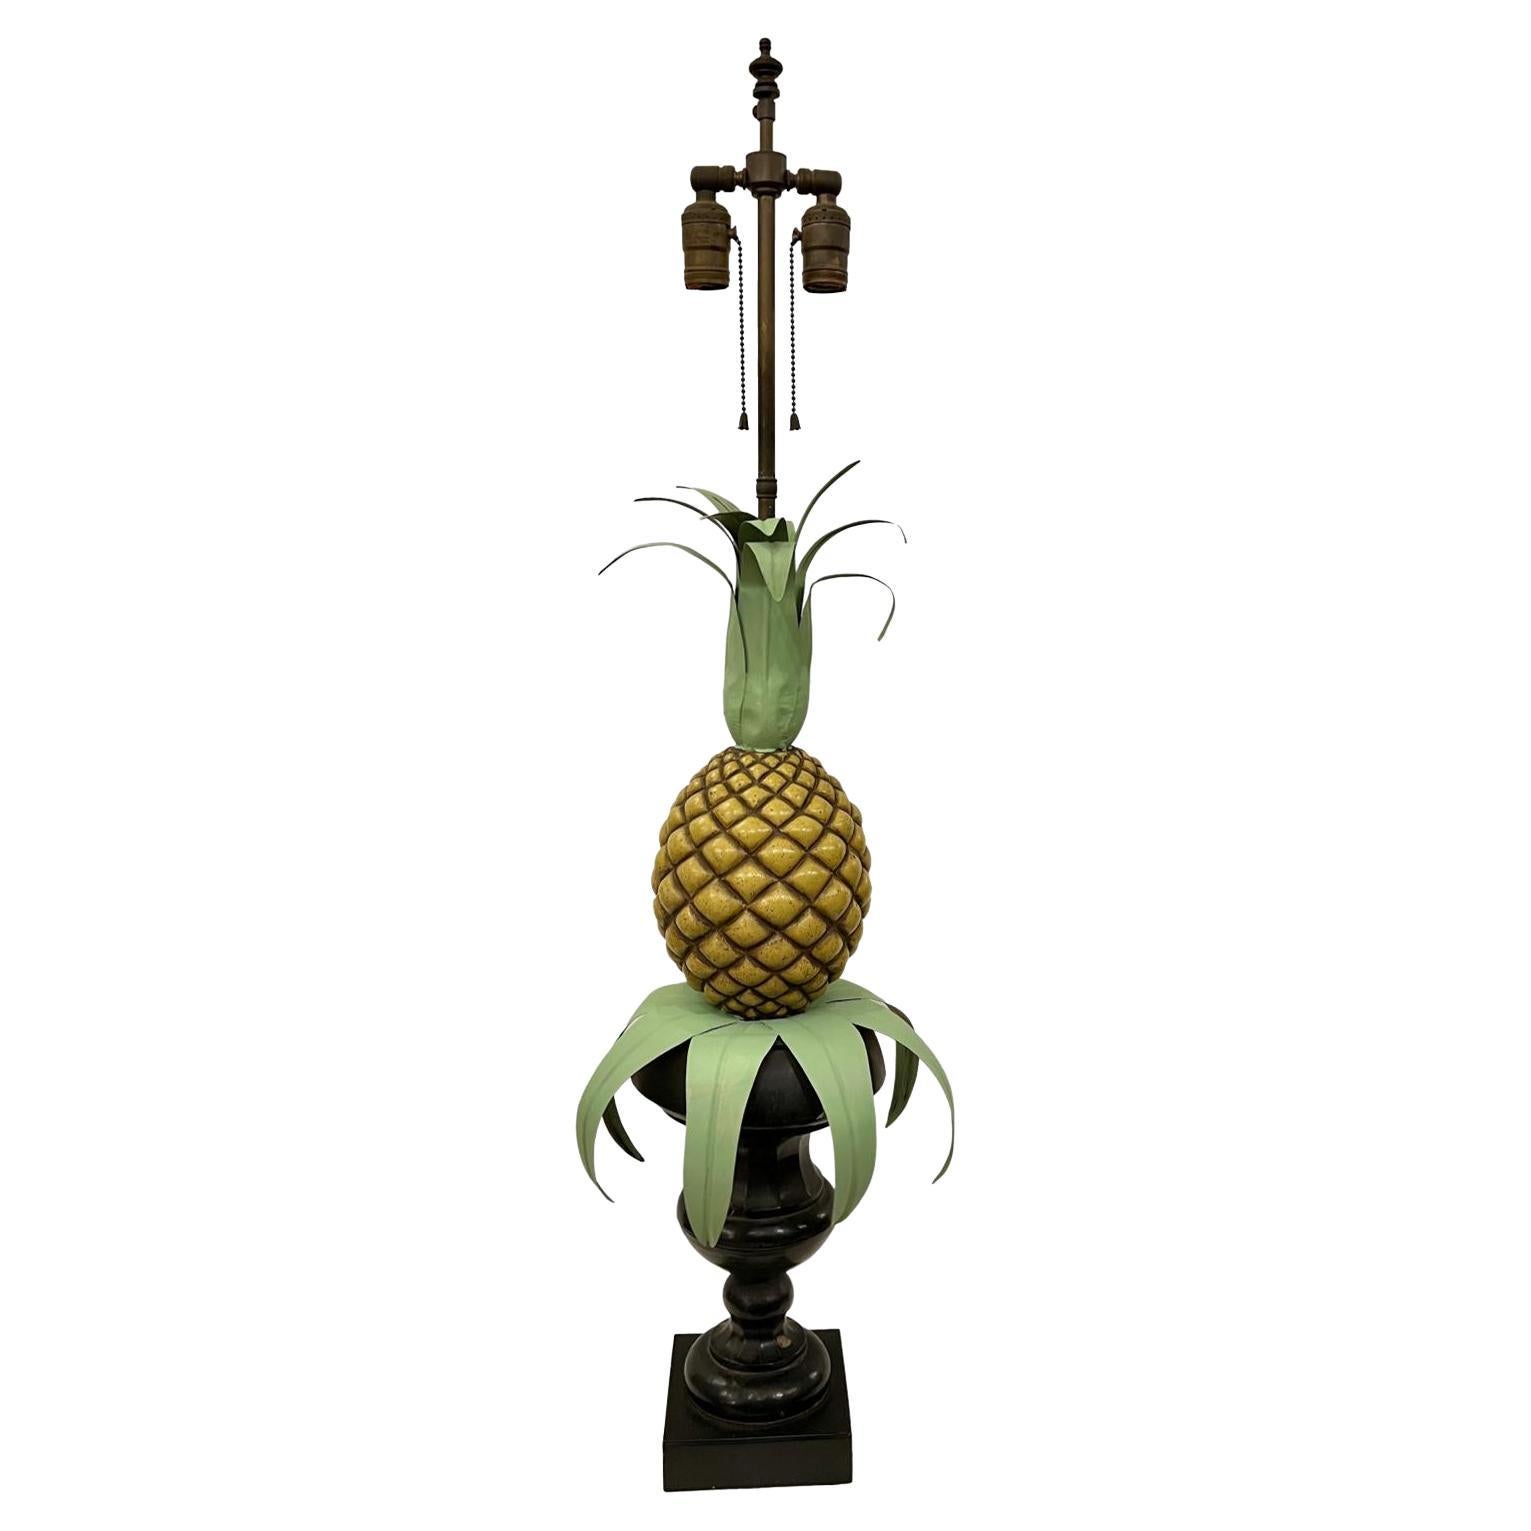 Pineapple Shaped Painted Tole Lamp For Sale